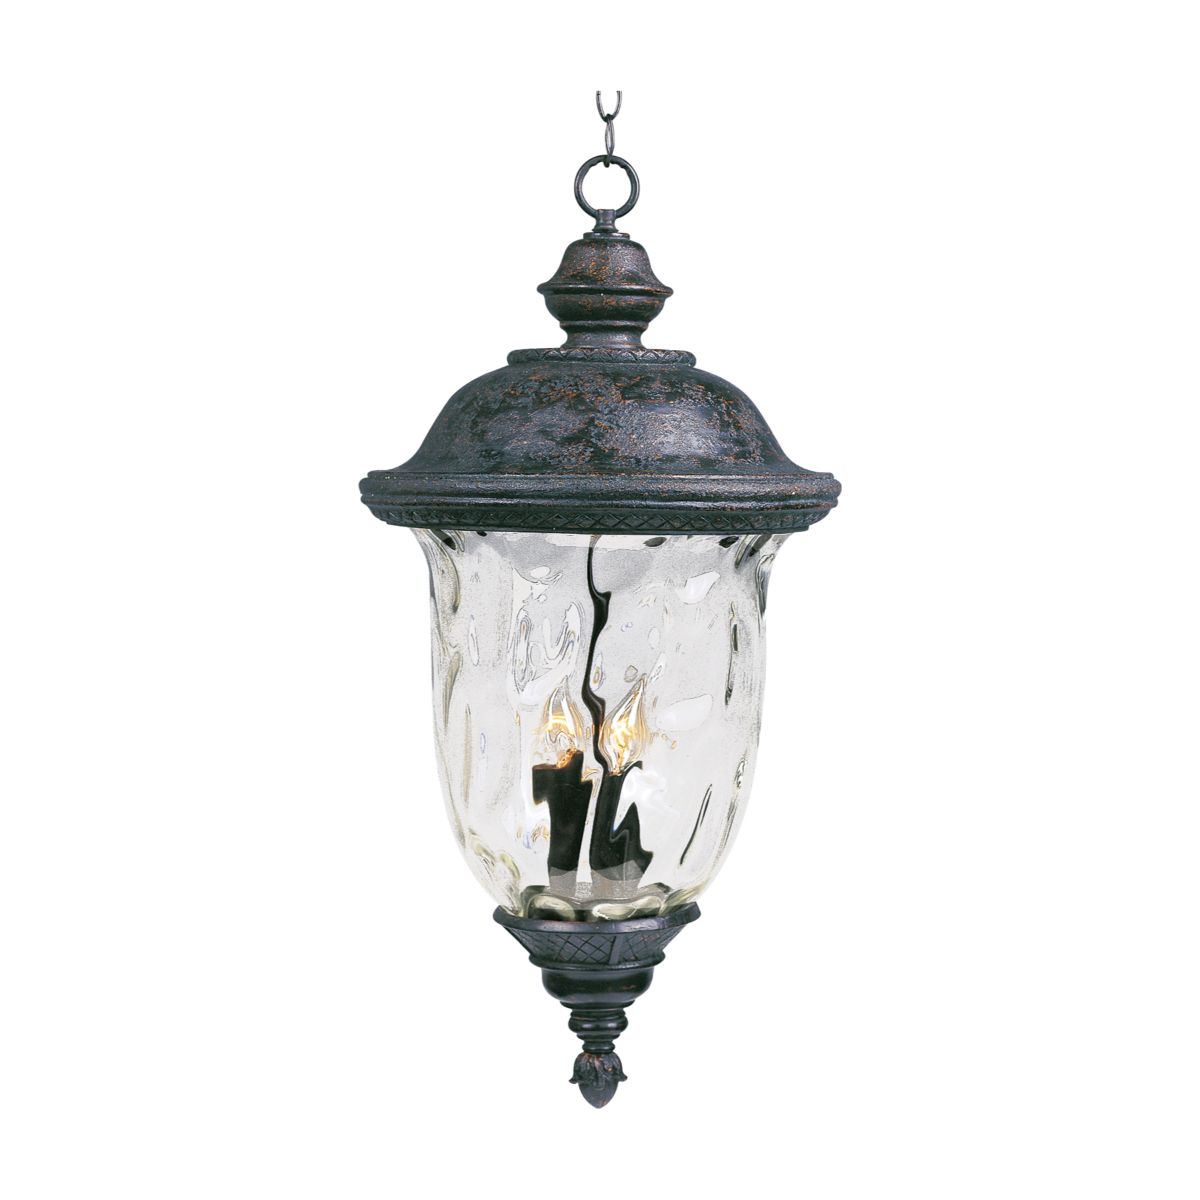 Carriage House VX 24 in. 3 Lights Outdoor Hanging Lantern Bronze Finish